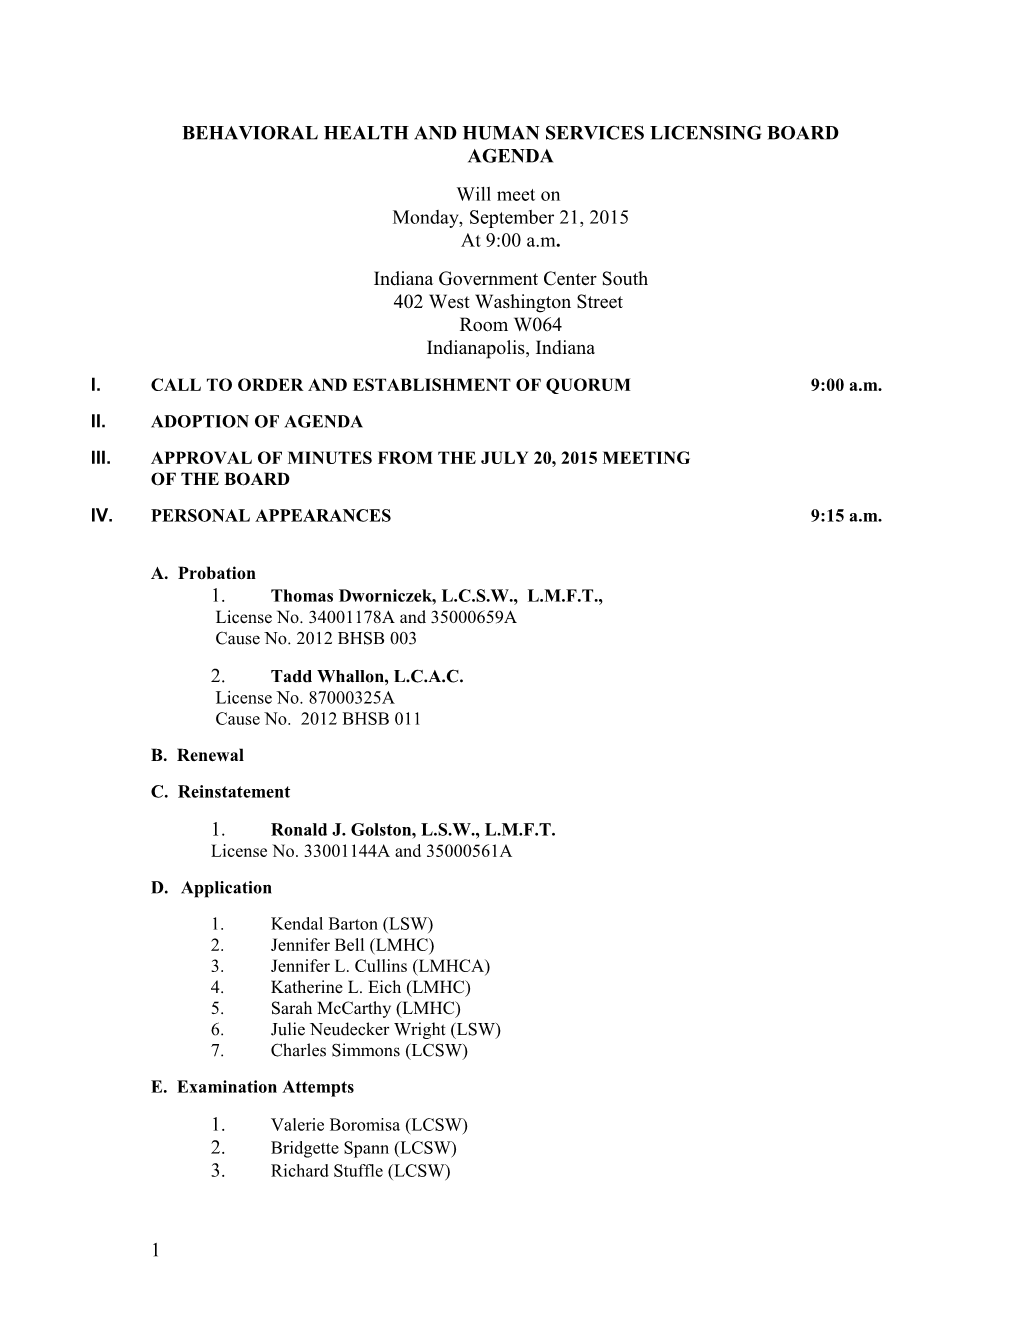 Behavioral Health and Human Services Licensing Board